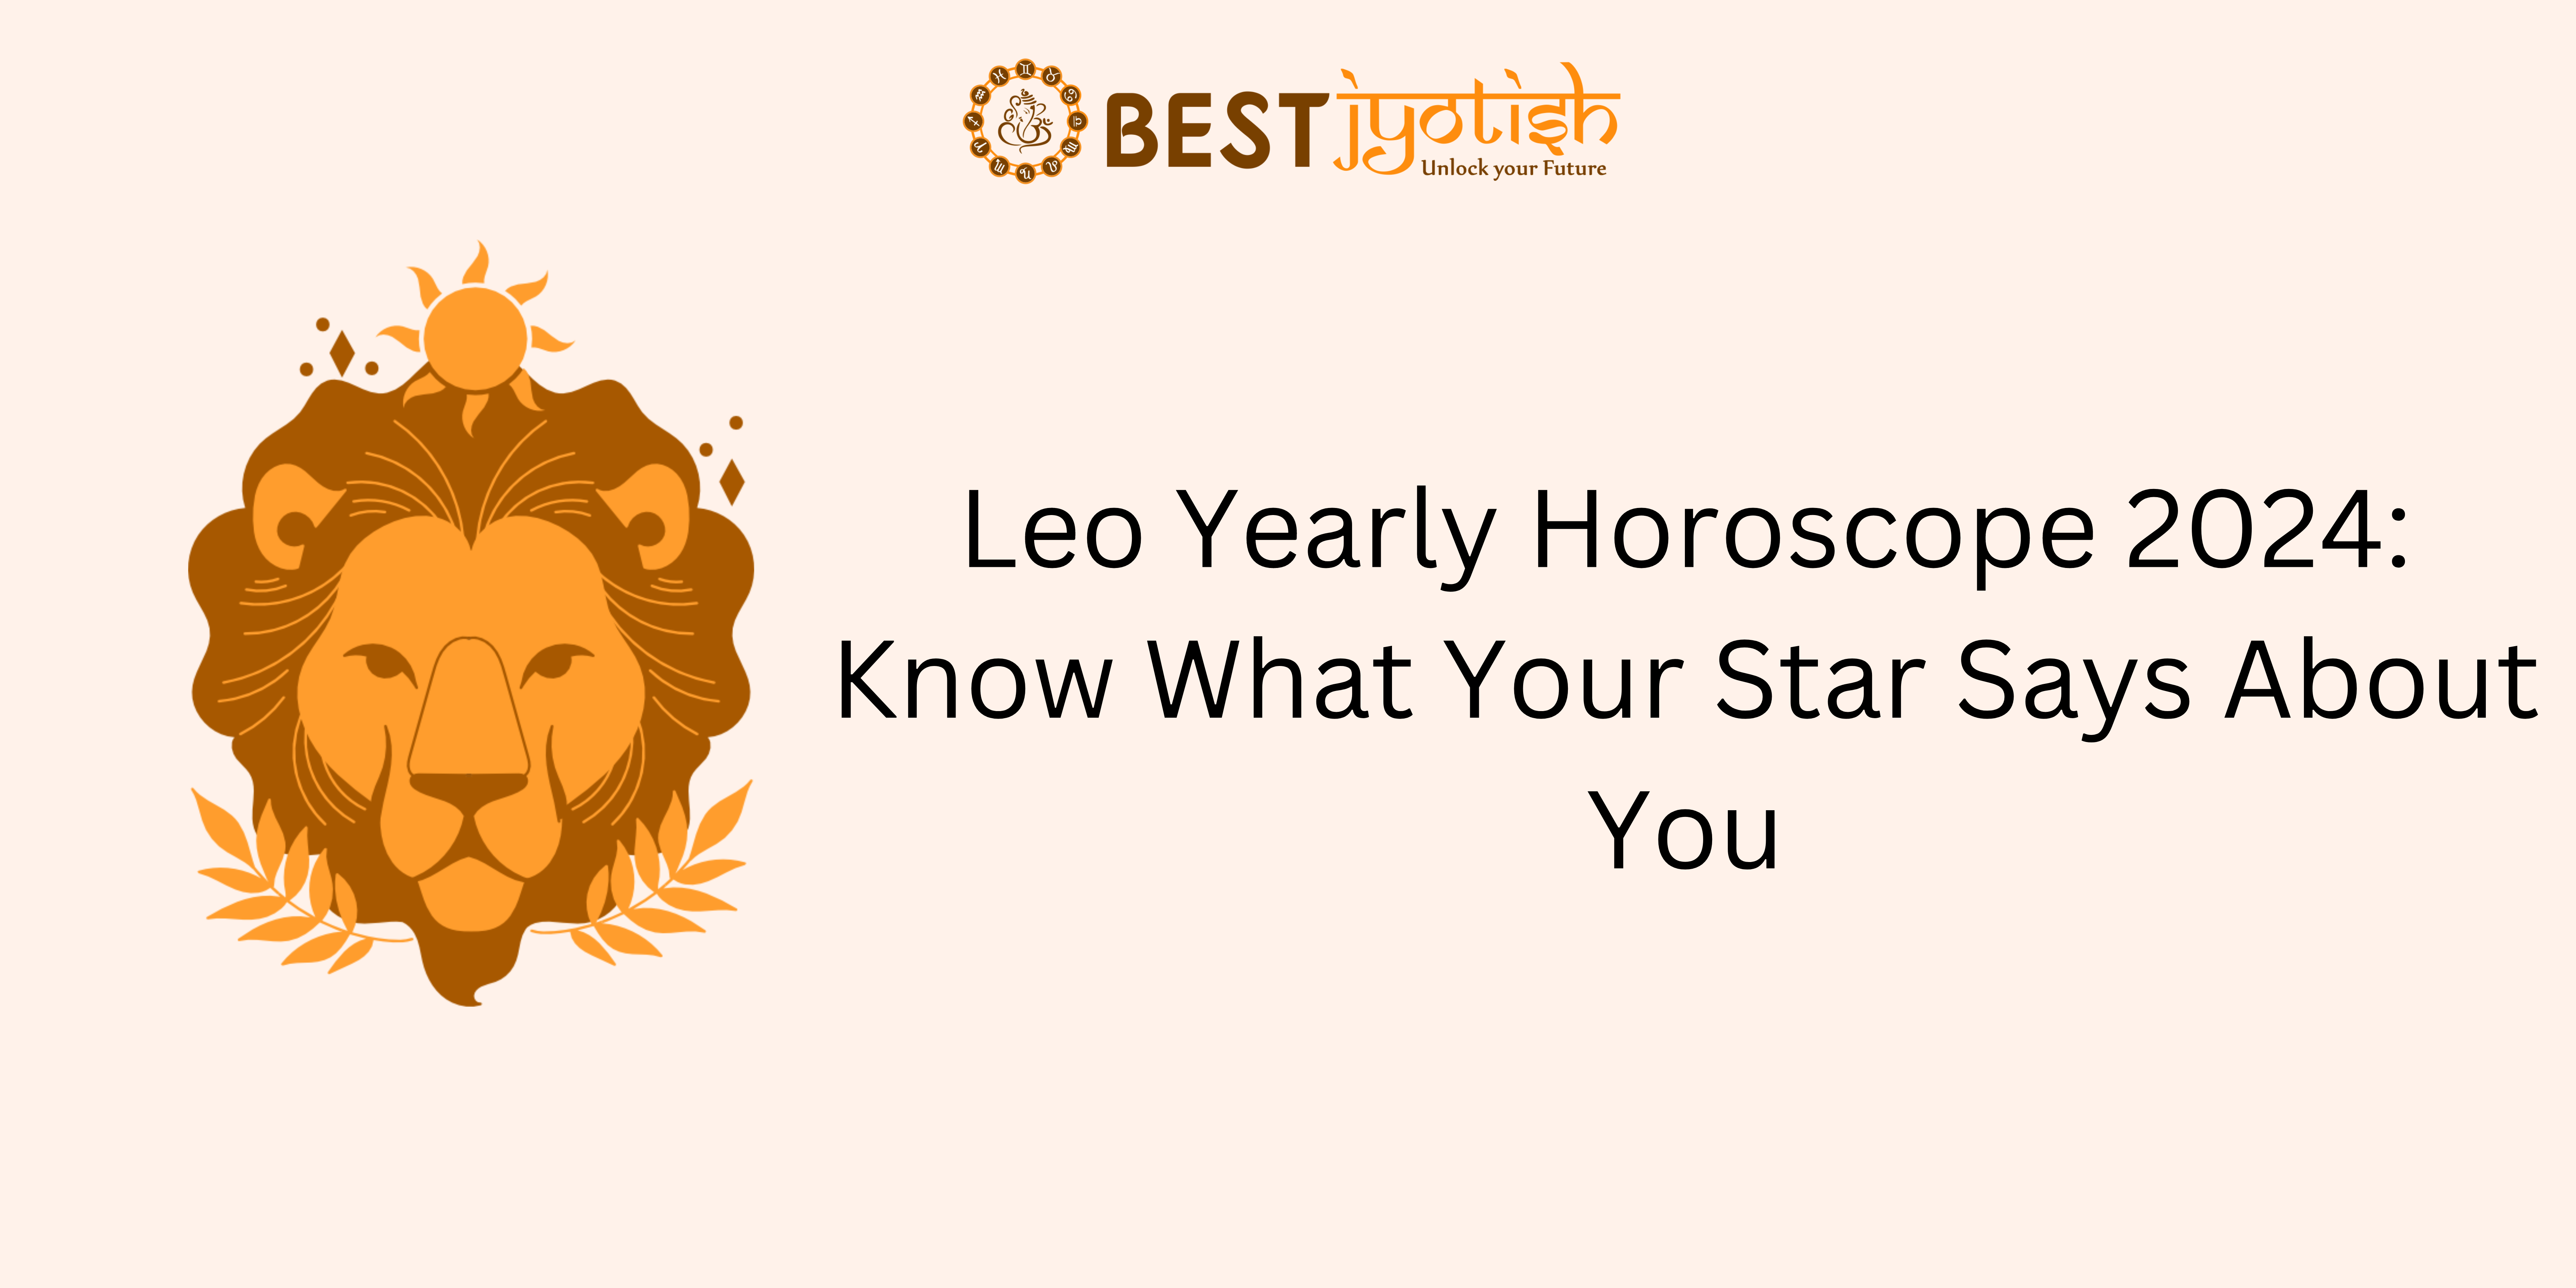 Leo Yearly Horoscope 2024: Know What Your Star Says About You